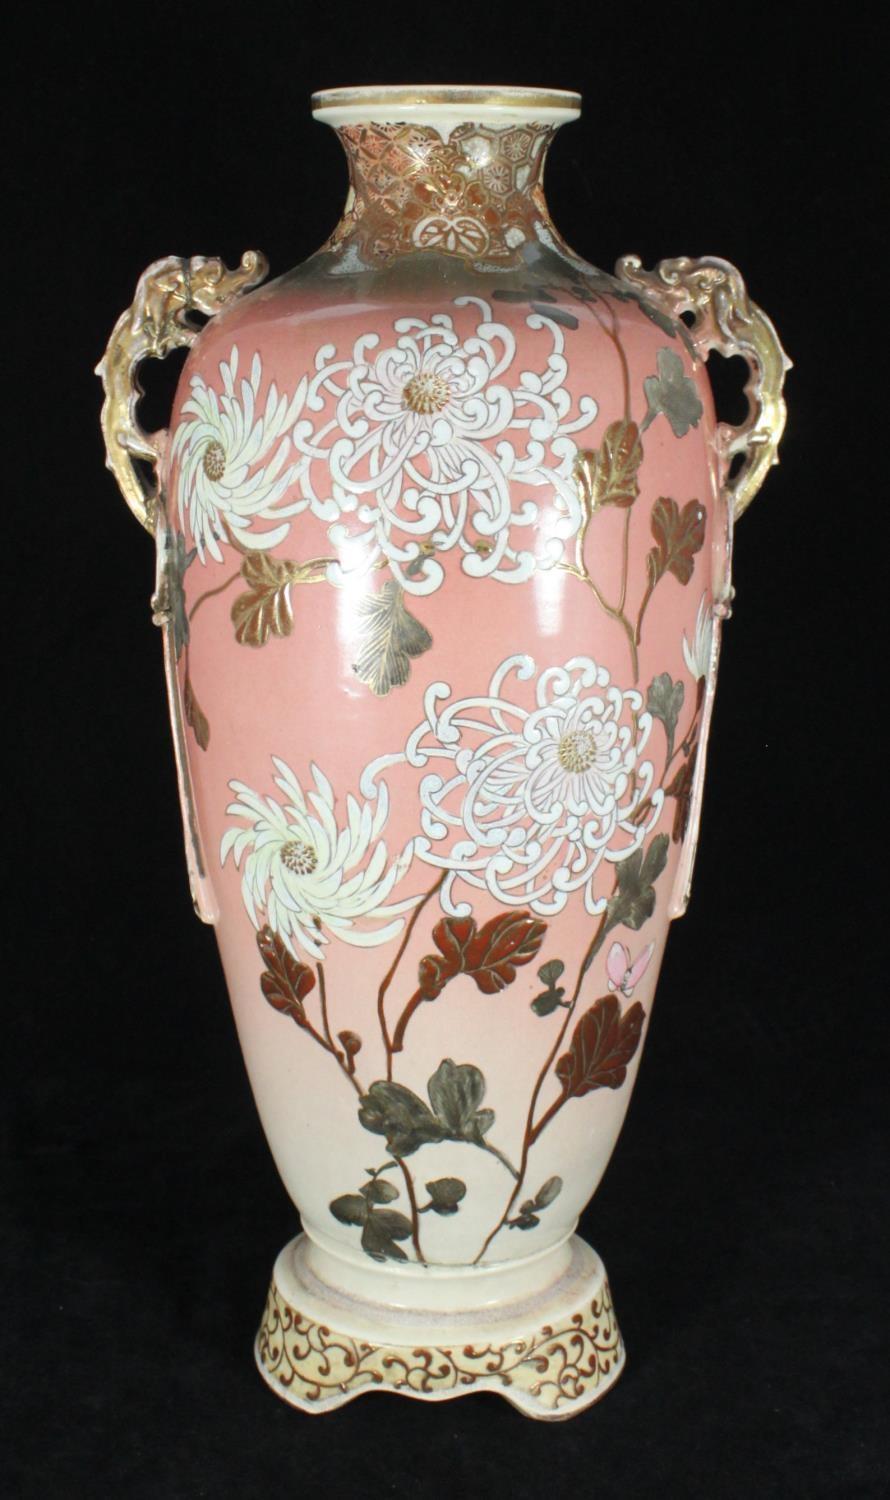 A late 19th /early 20th century Japanese pottery vase with stylised dragon handles and enamel floral